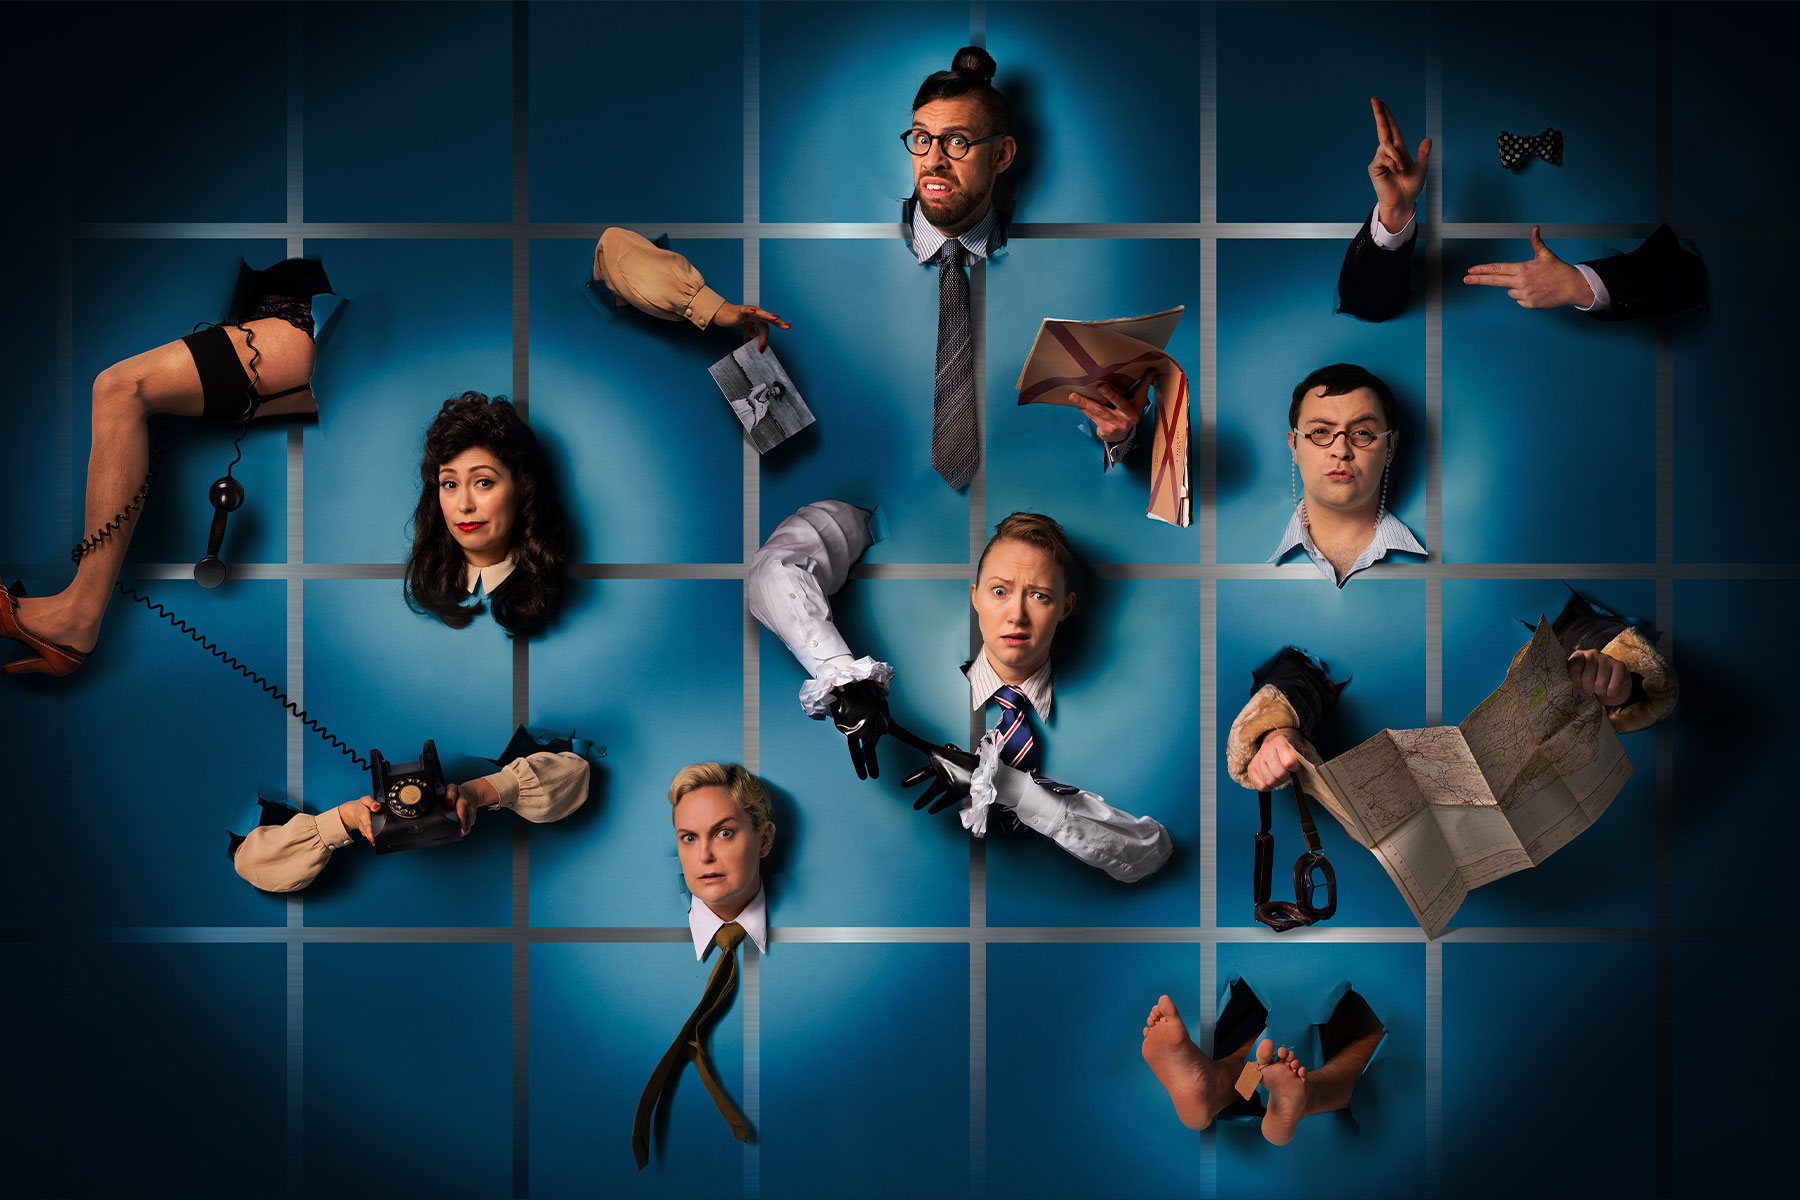 A promotional image for Operation Mincemeat depicting cast members and various limbs protruding through a wall